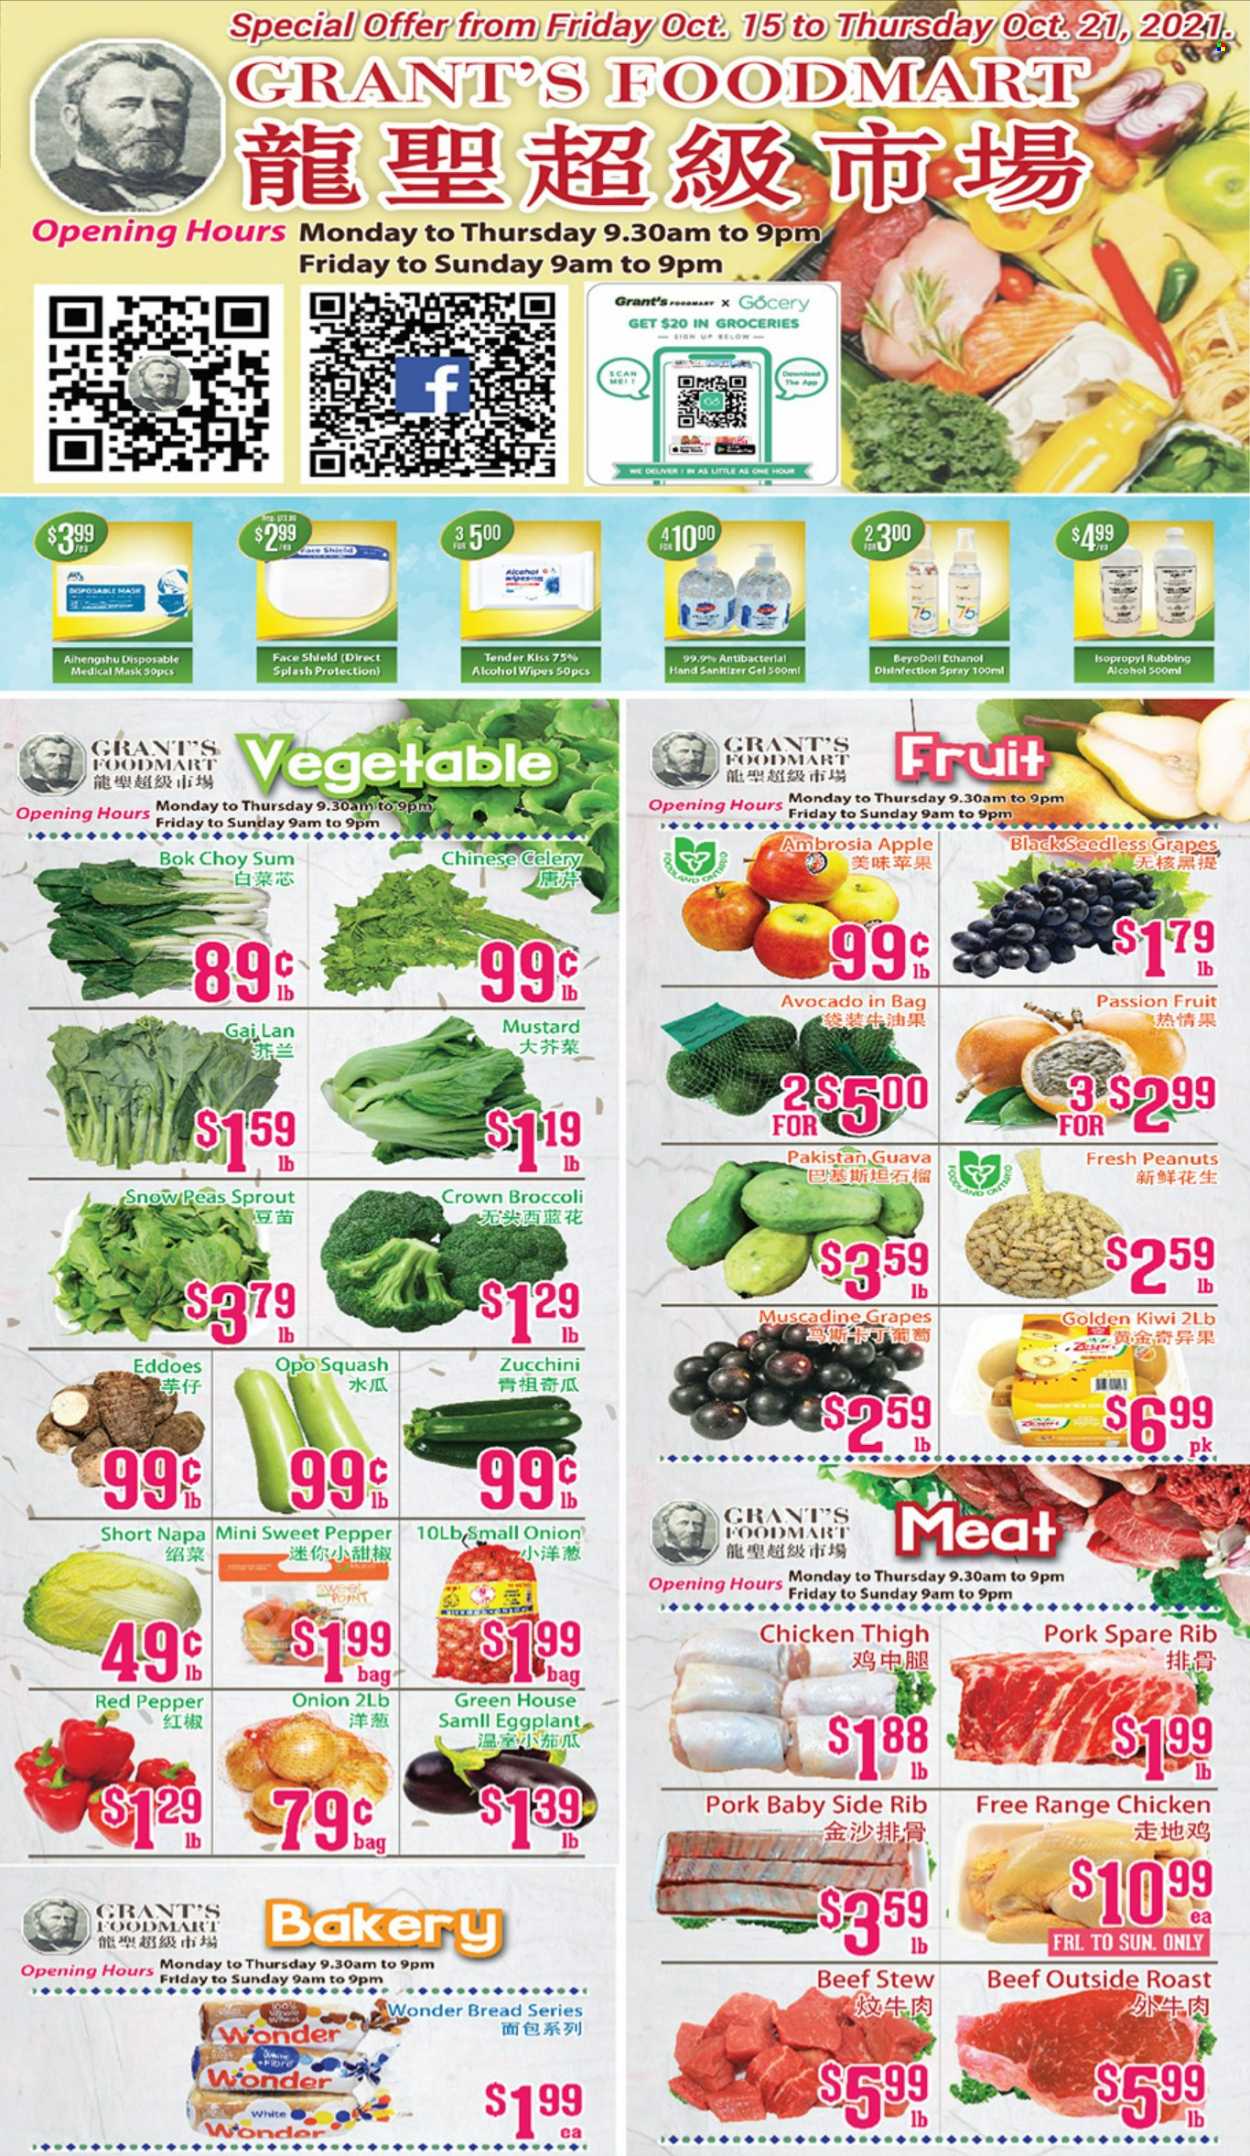 thumbnail - Grant's Foodmart Flyer - October 15, 2021 - October 21, 2021 - Sales products - bread, bok choy, broccoli, celery, zucchini, peas, onion, eggplant, avocado, grapes, guava, snow peas, mustard, peanuts, Grant's, wipes, Rex, hand sanitizer, kiwi. Page 1.